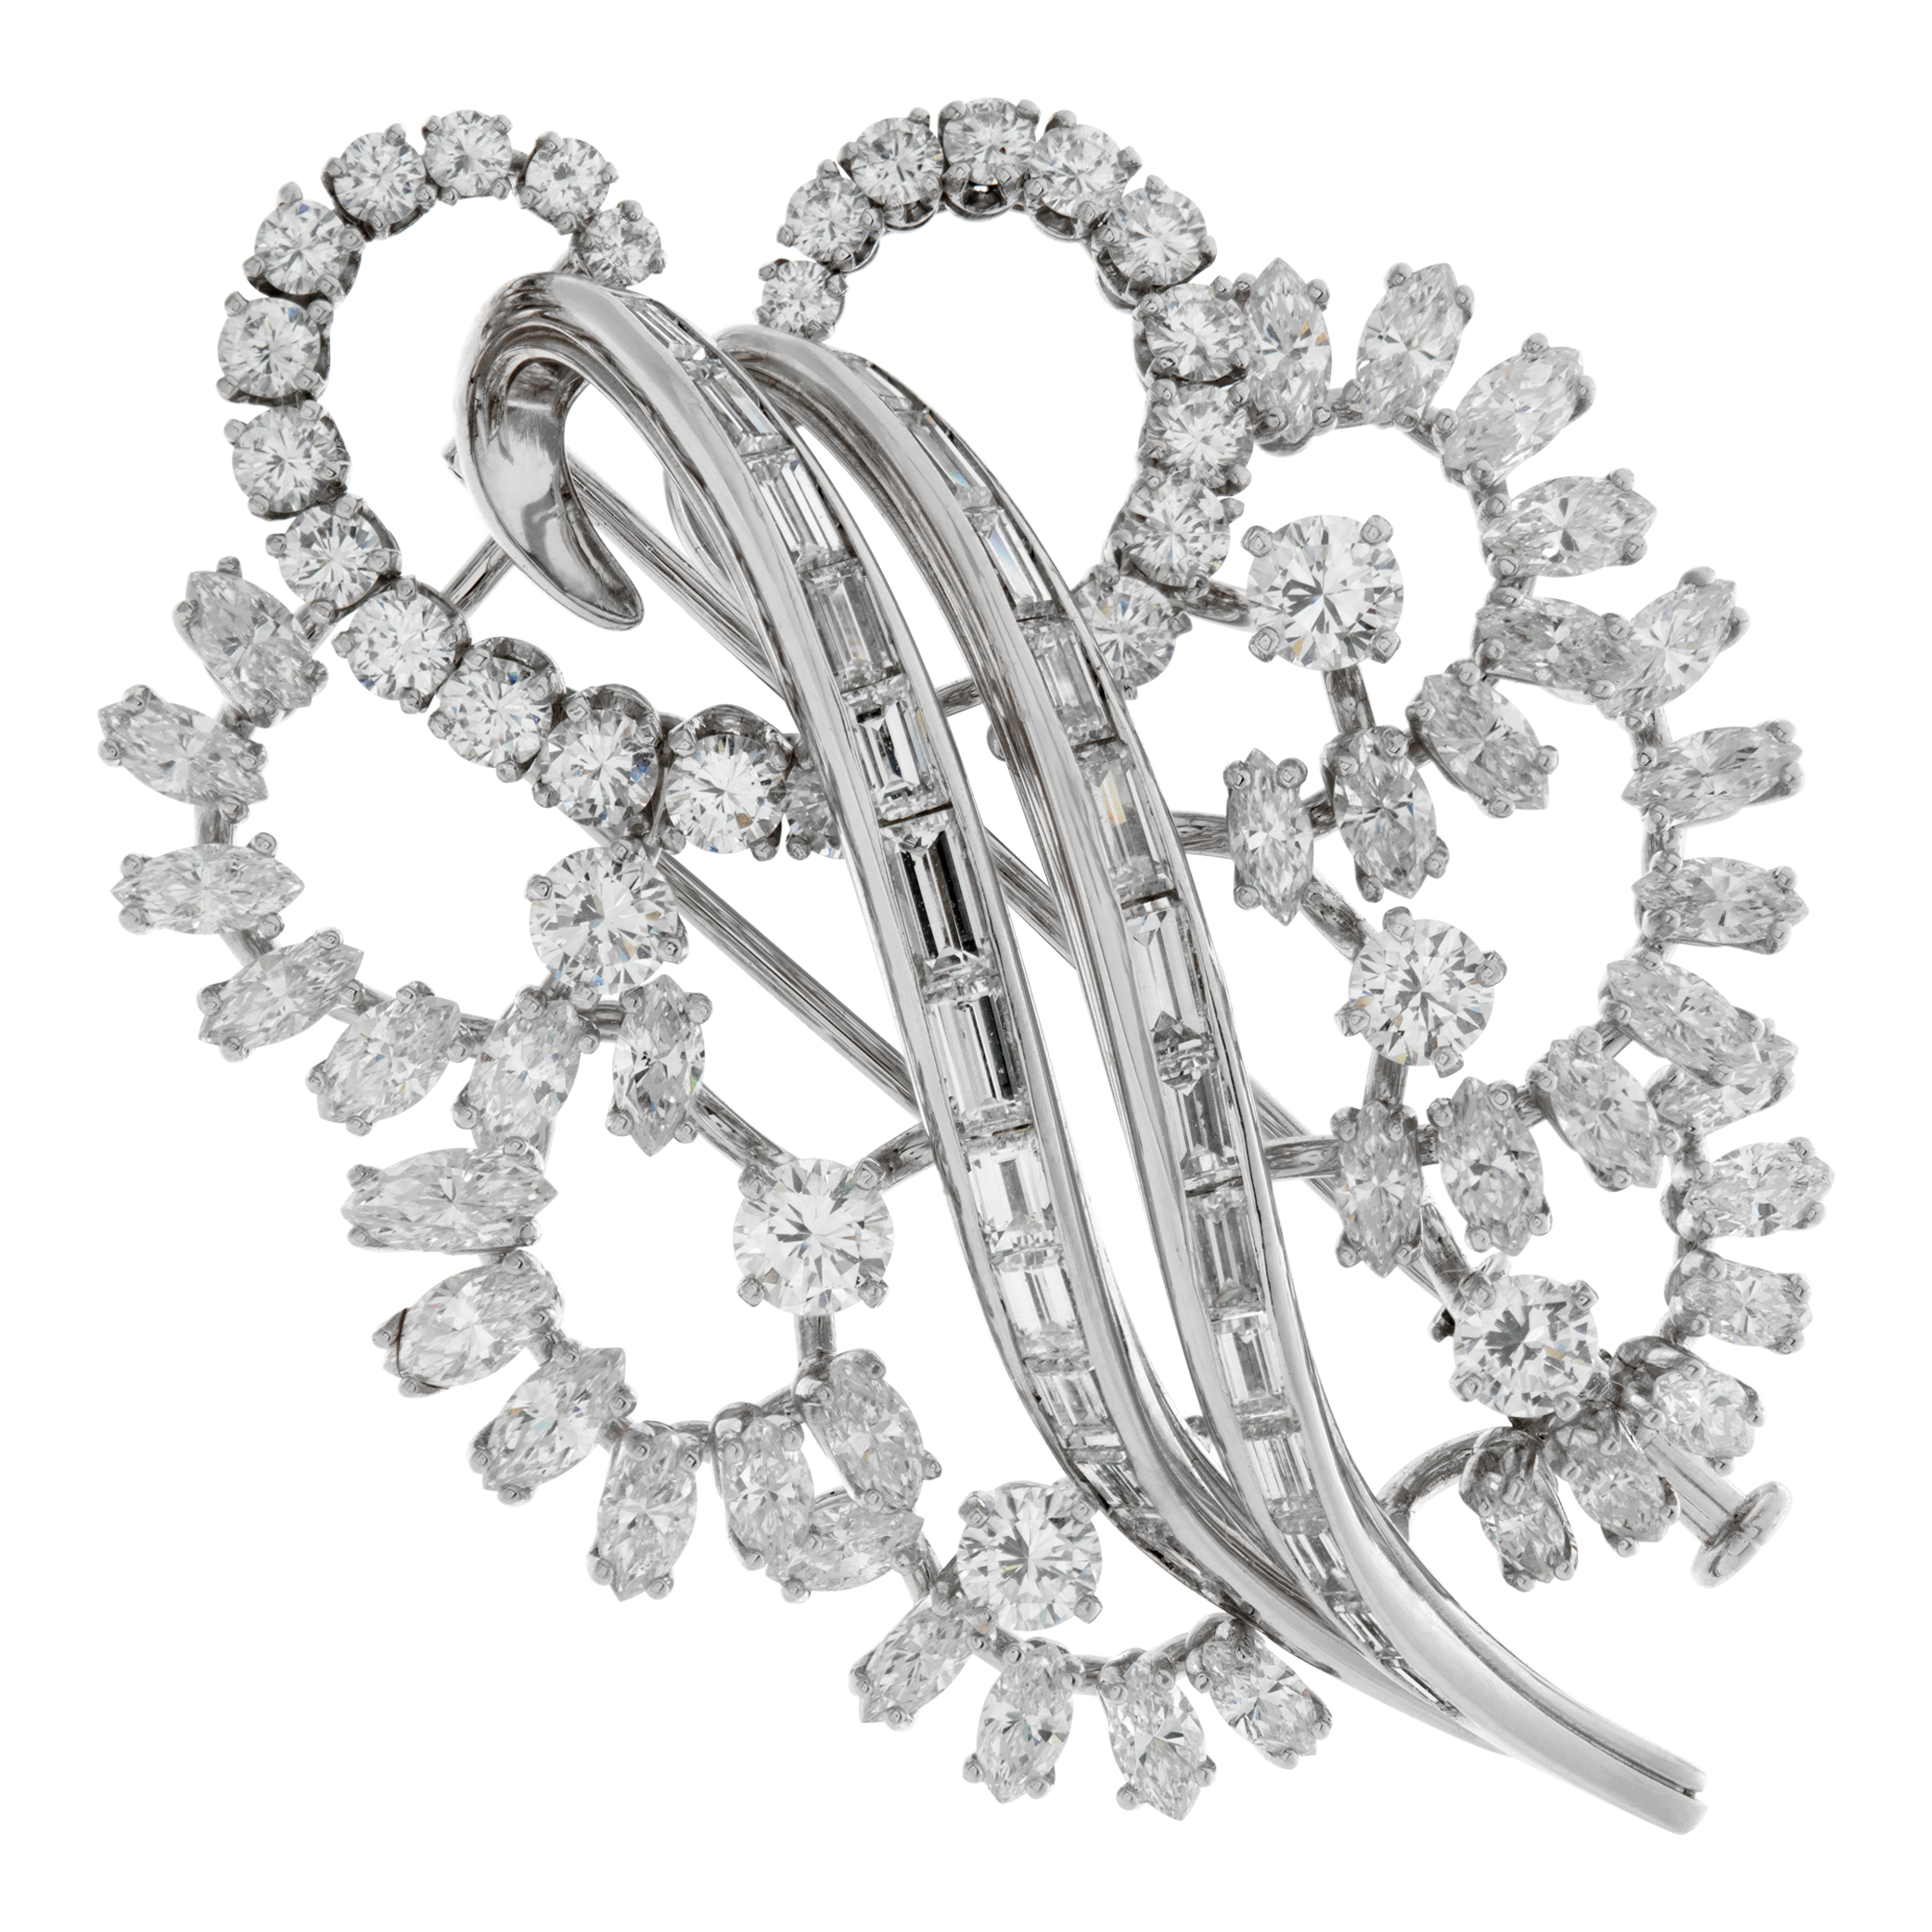 Baguette, Marquise & Round Brilliant Cut Diamonds Brooch In 18k White Gold. Approx. 3.00 Carats. (Stones)